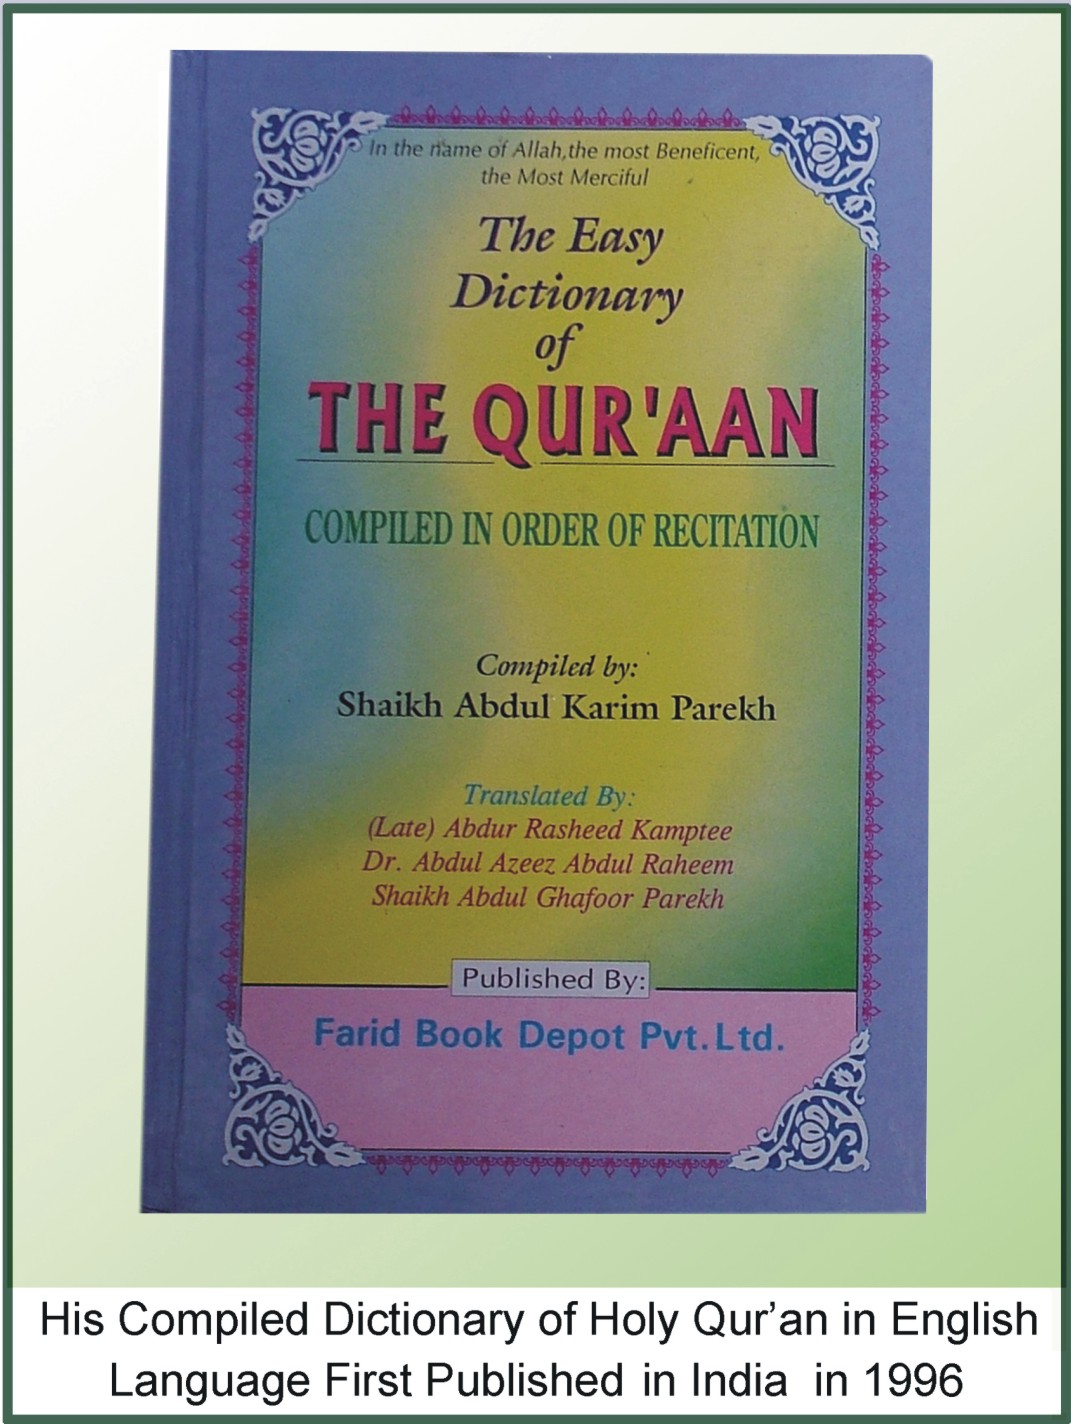 Compiled Dictionary of The Holy Qur'an (English) First Published in 1996